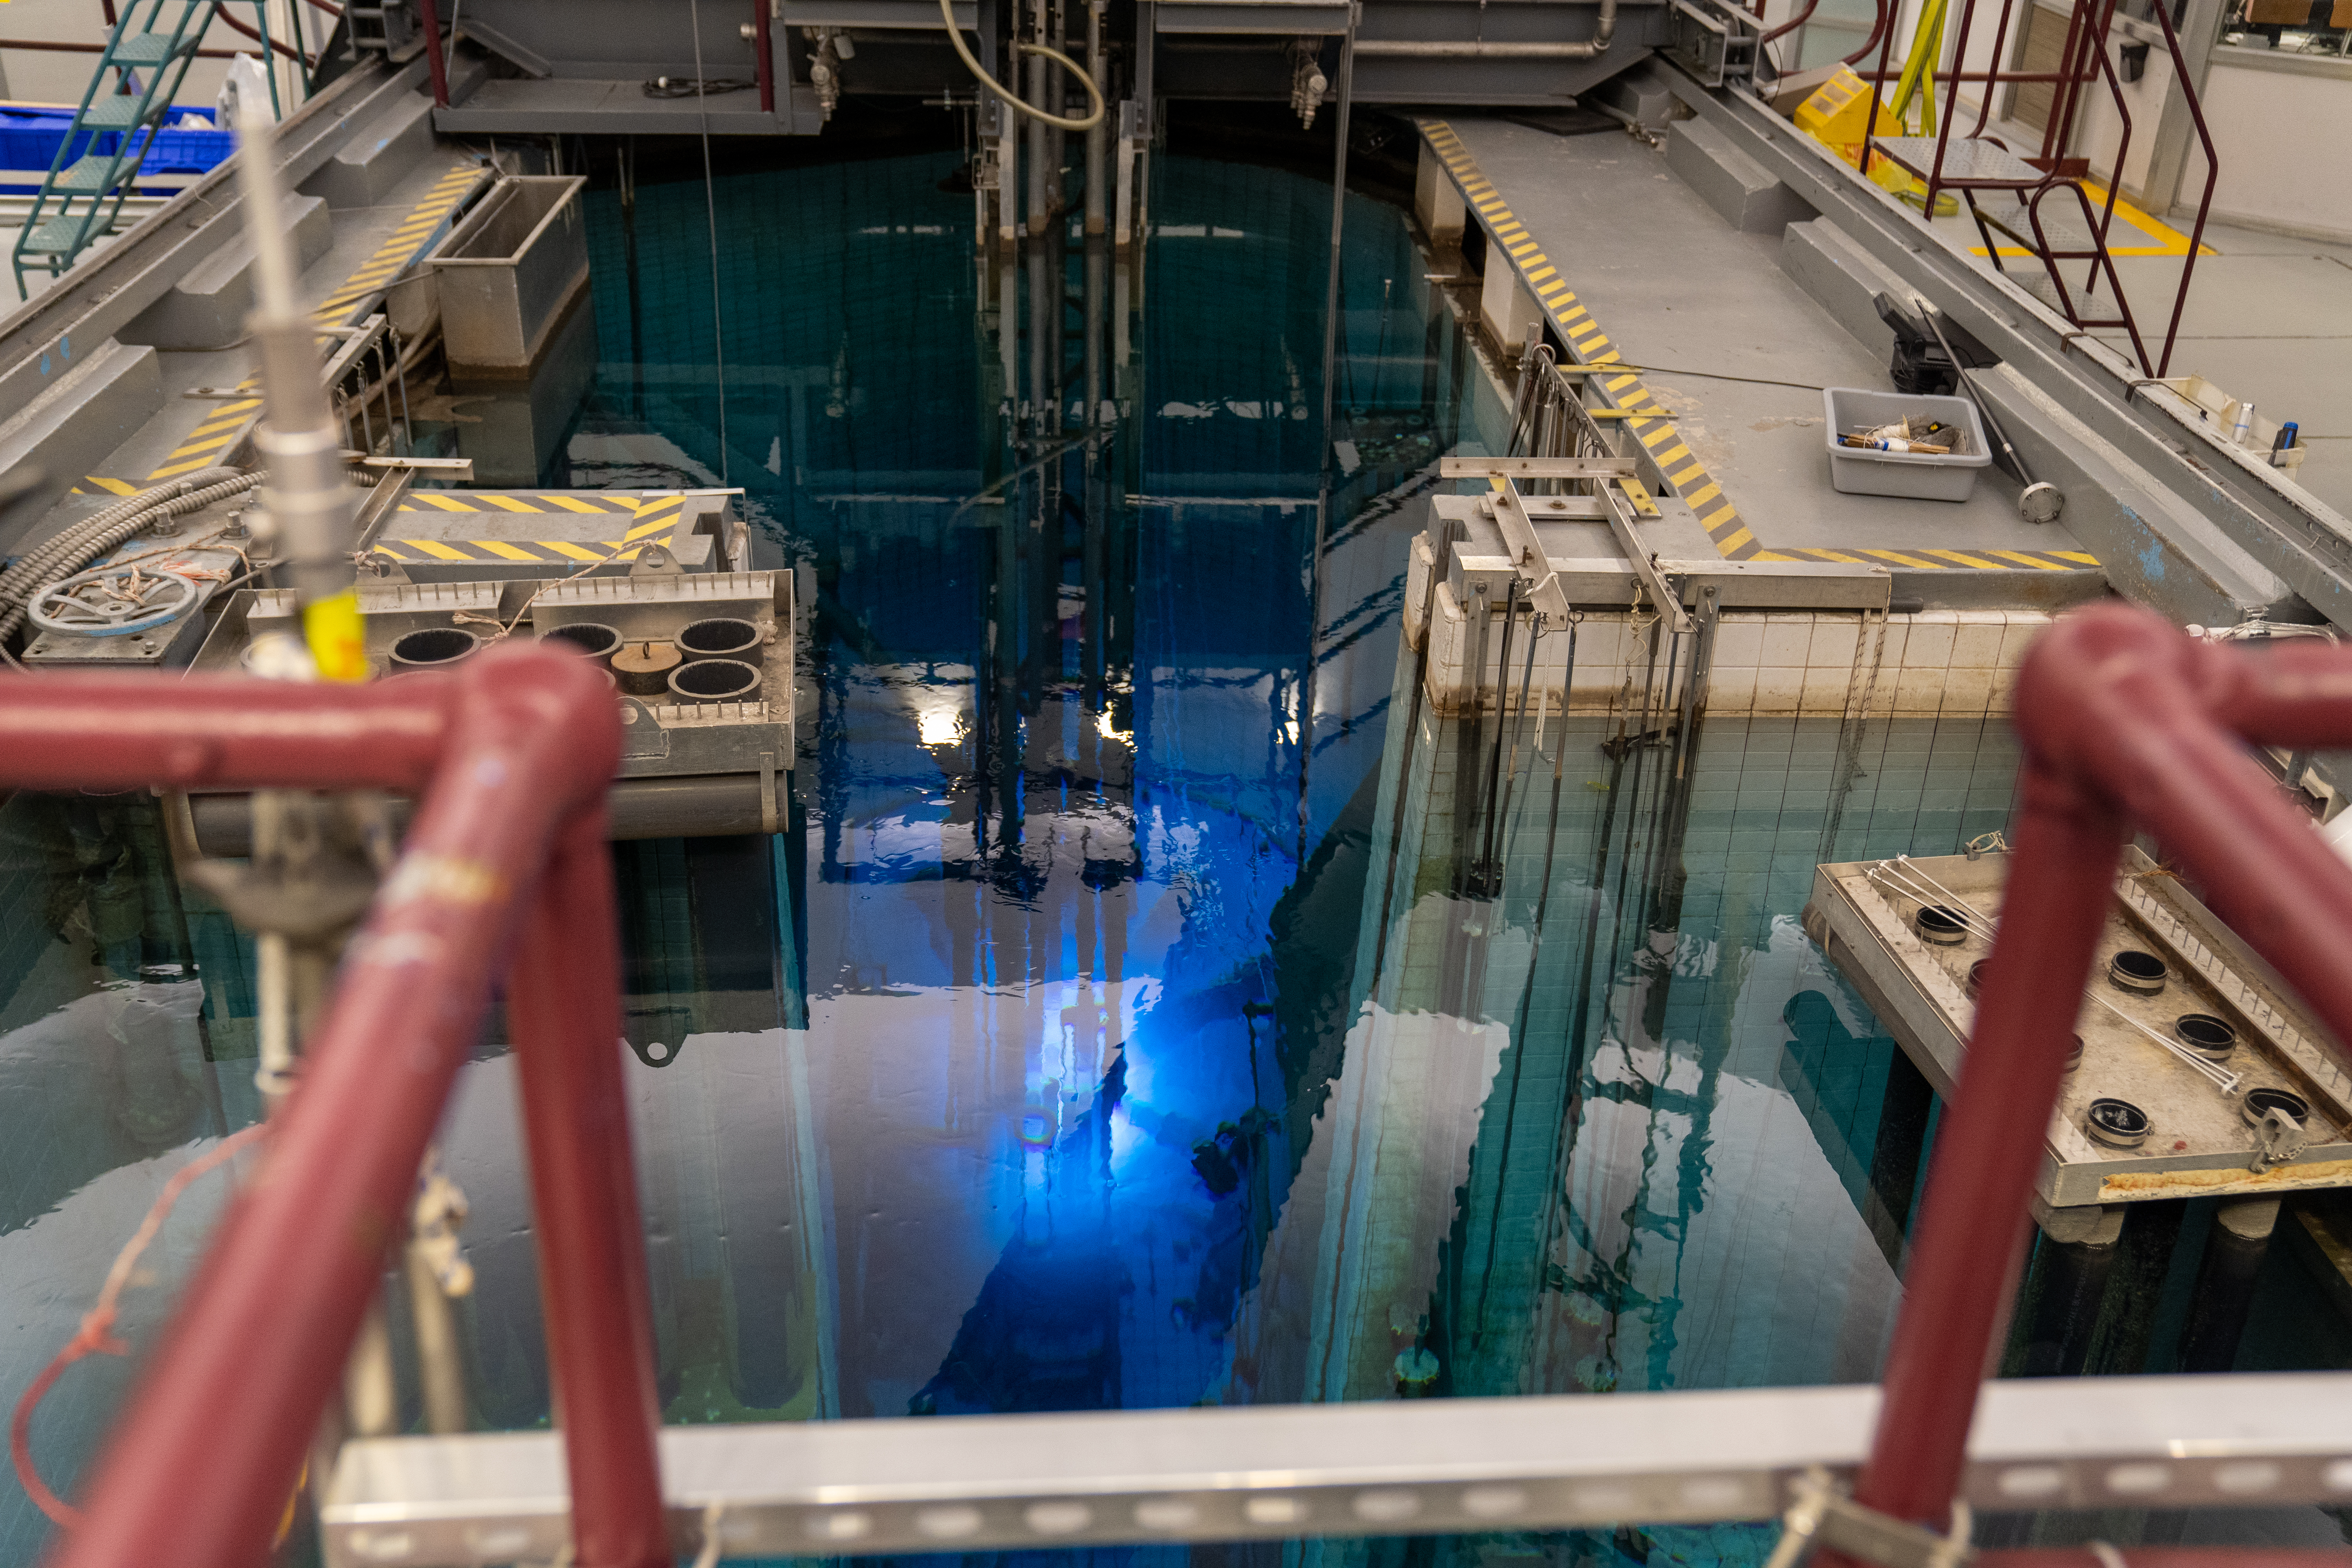 View of the McMaster Nuclear Reactor core, which glows blue.